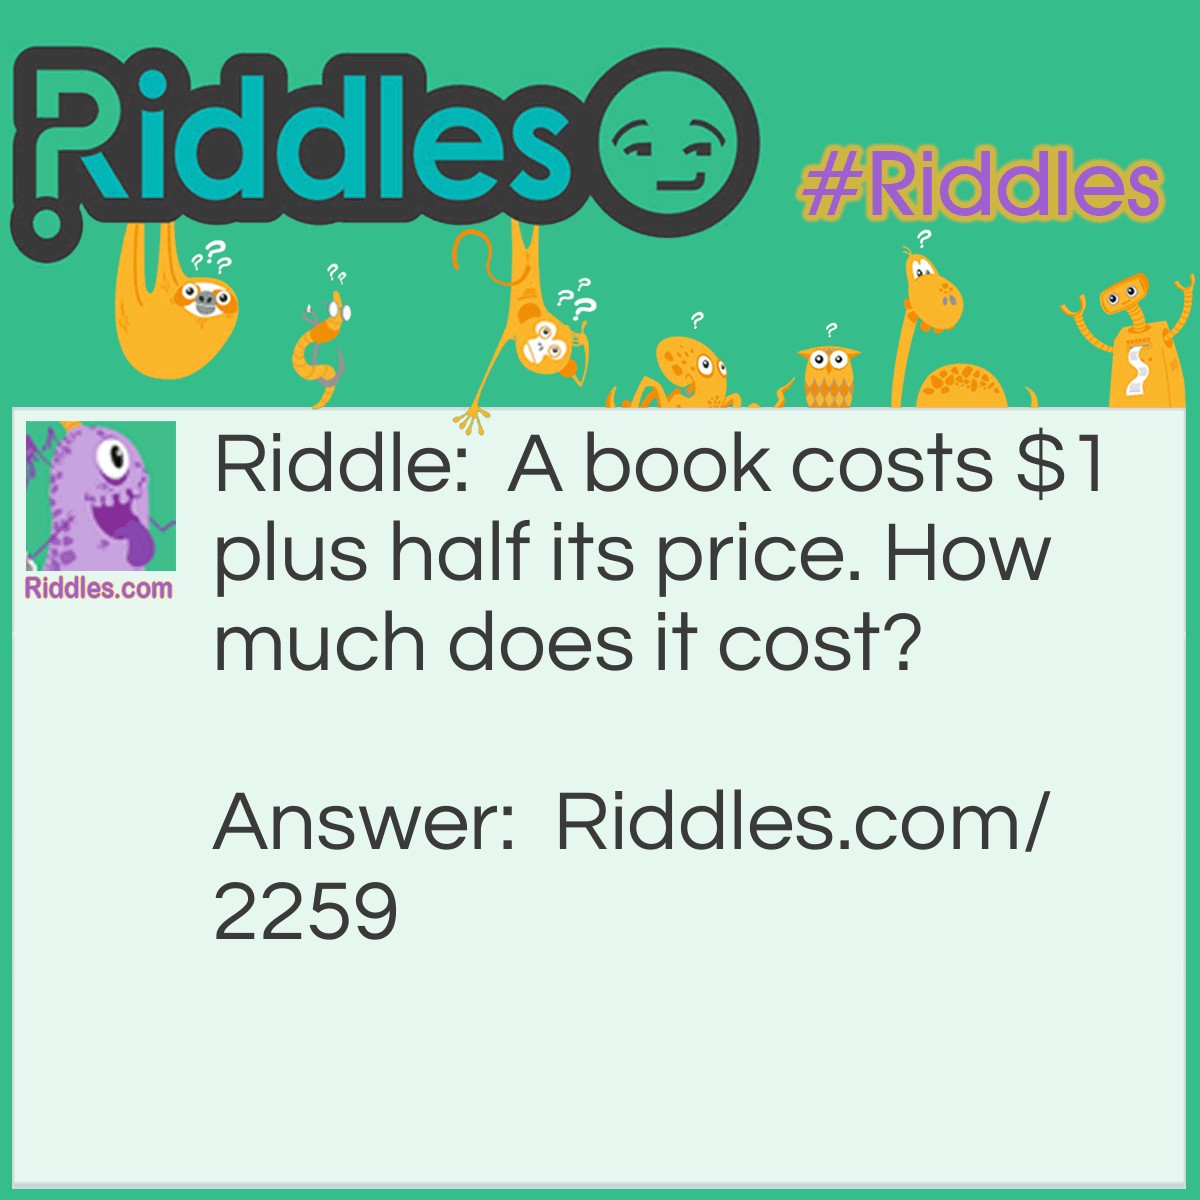 Riddle: A book costs $1 plus half its price. How much does it cost? Answer: $2